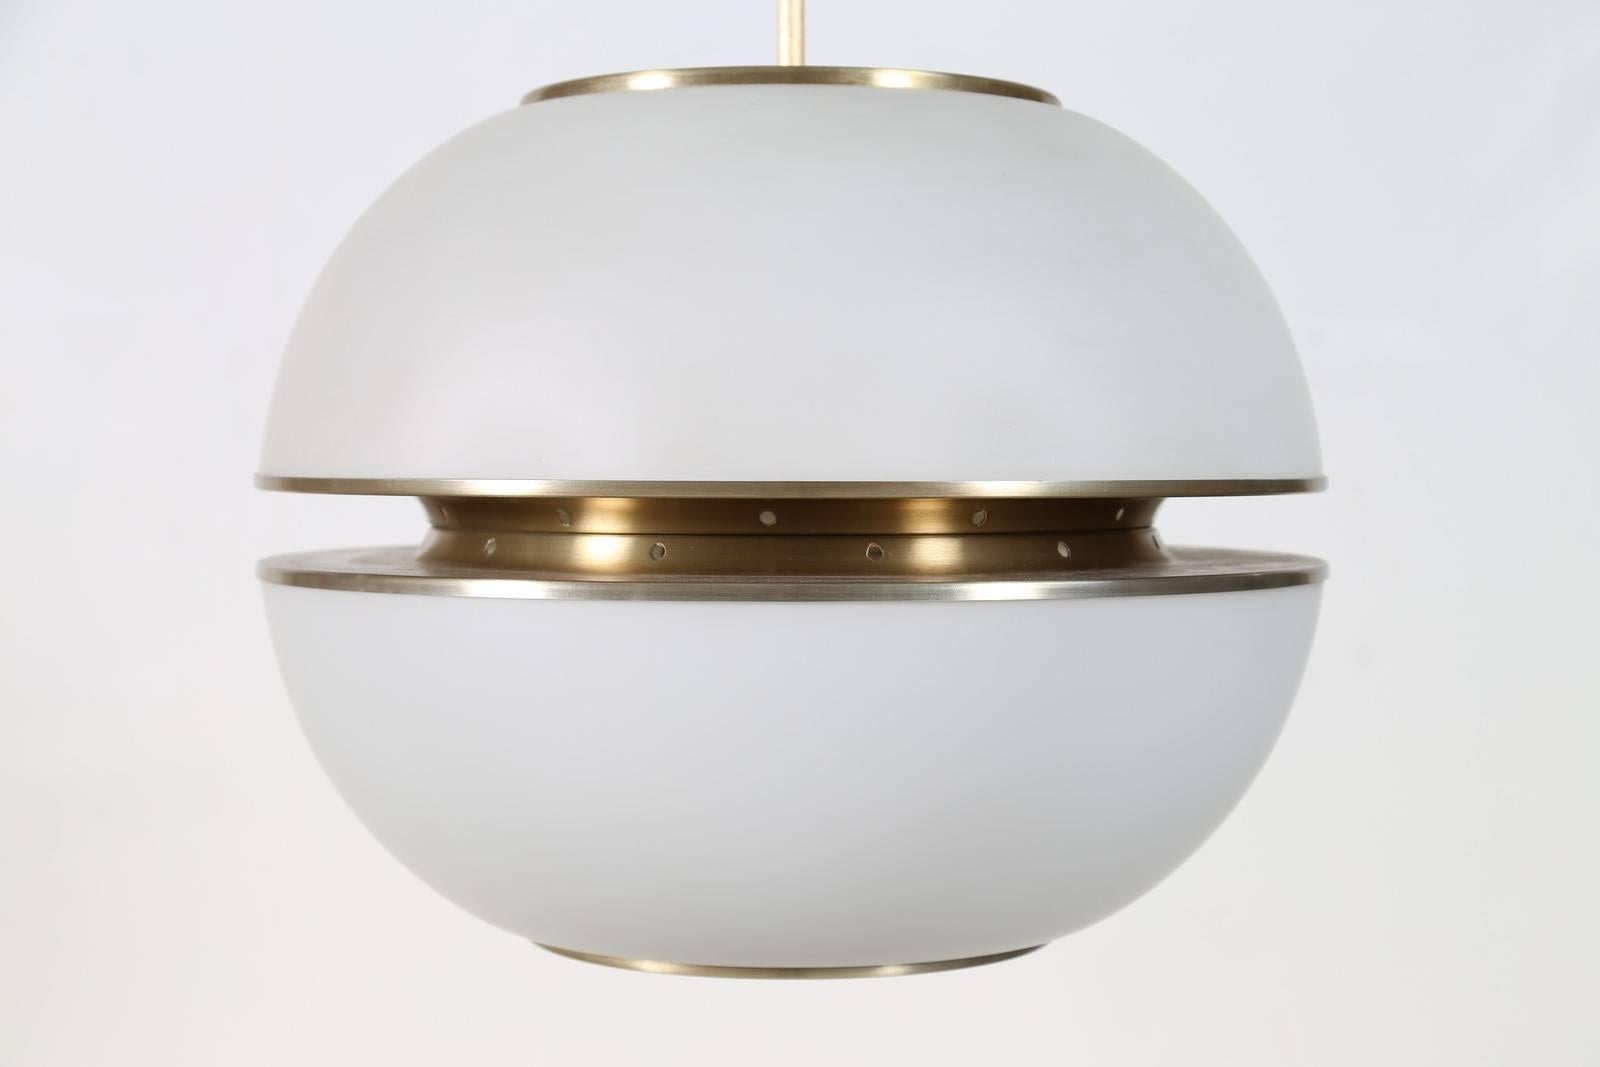 Oscar Torlasco (1934-2004)

A large and imposing modernist Lumi chandelier attributed to Oscar Torlasco, in spherical white opaline glass bisected by sleek brass-colored satin finish metal mounts. 

Italy, 1960's.

Lumi Milano maker’s mark at top of